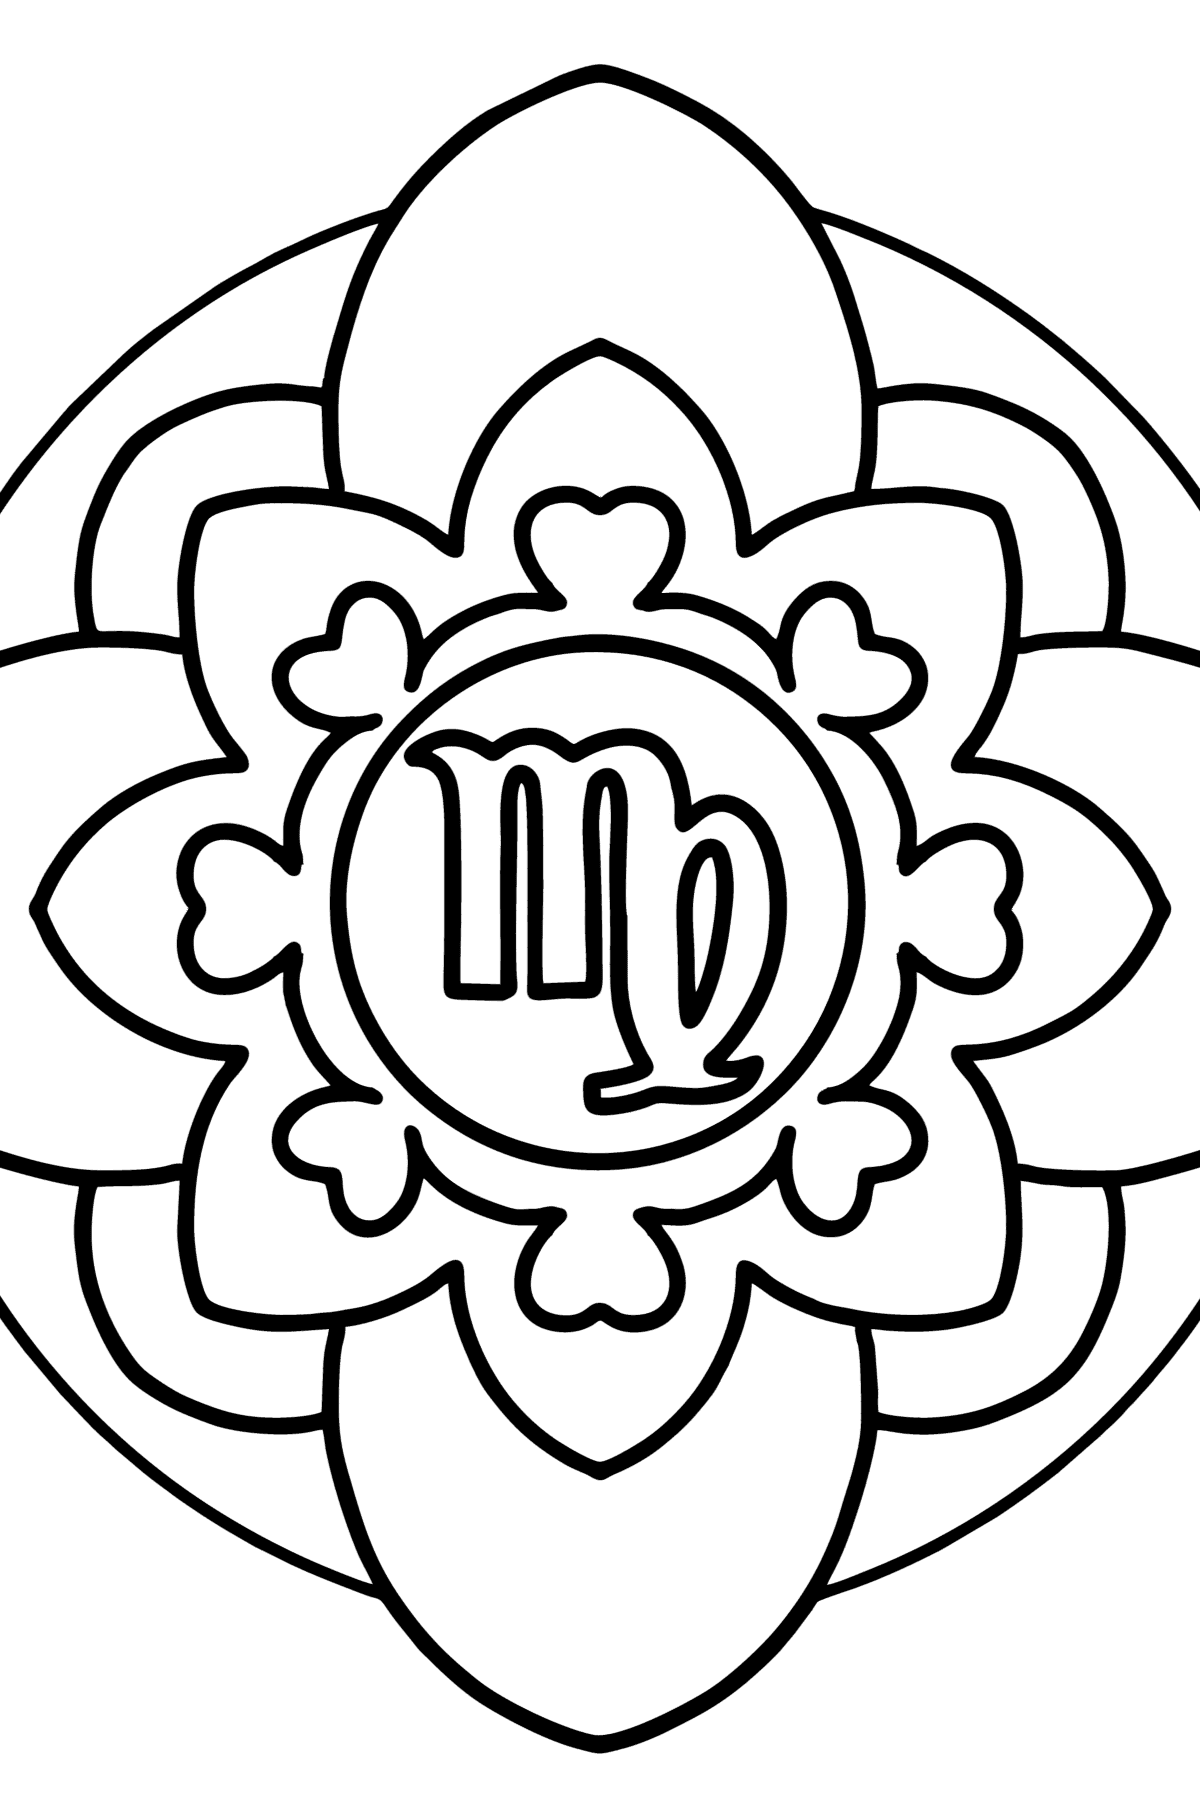 Coloring page - zodiac sign Virgo - Coloring Pages for Kids